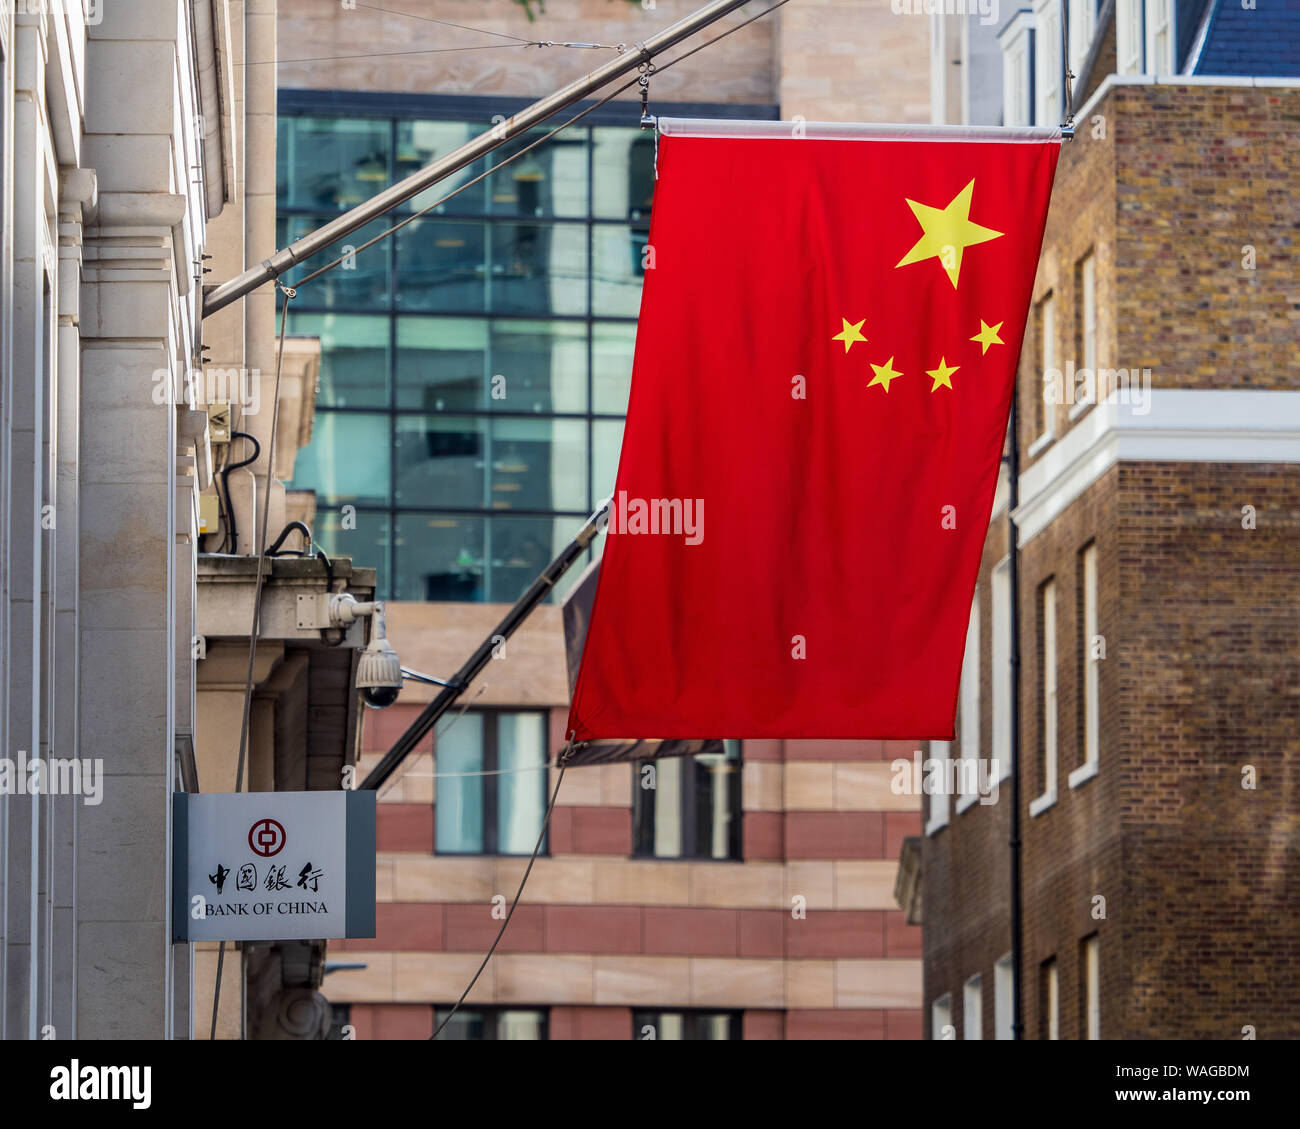 Chinese Flags outside the Bank of China London - Chinese flags mark a growing presence of Chinese Banks in the City of London financial district. Stock Photo